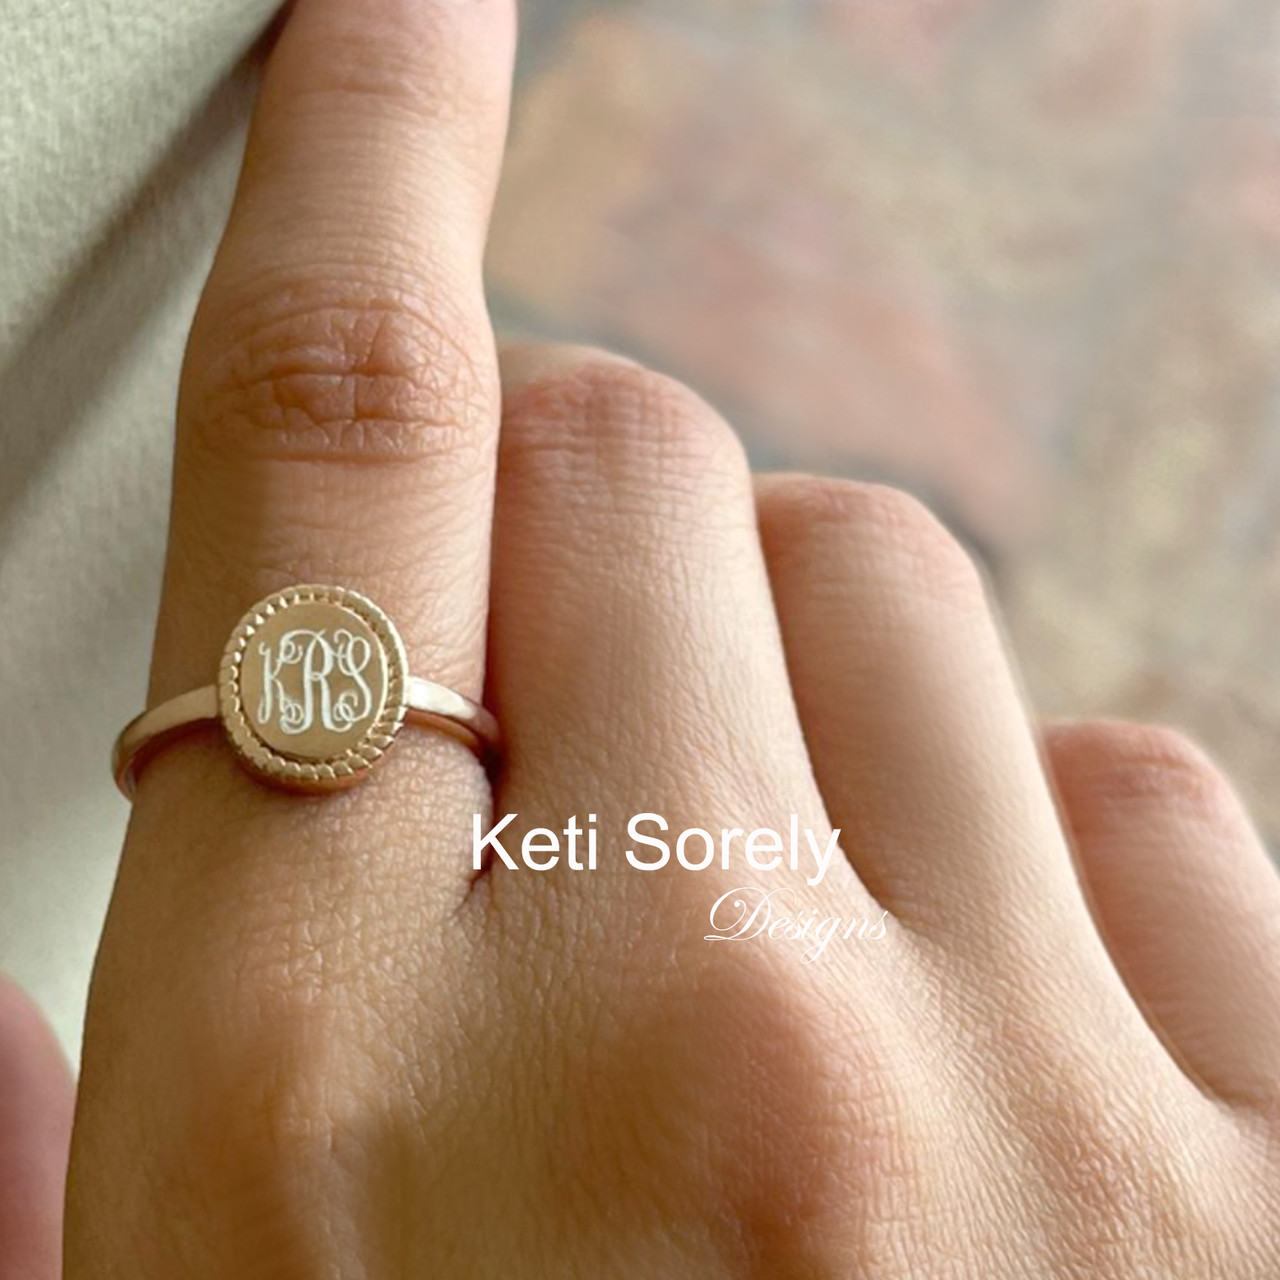 Personalized Oval Signet Ring with Twist Border and engraved